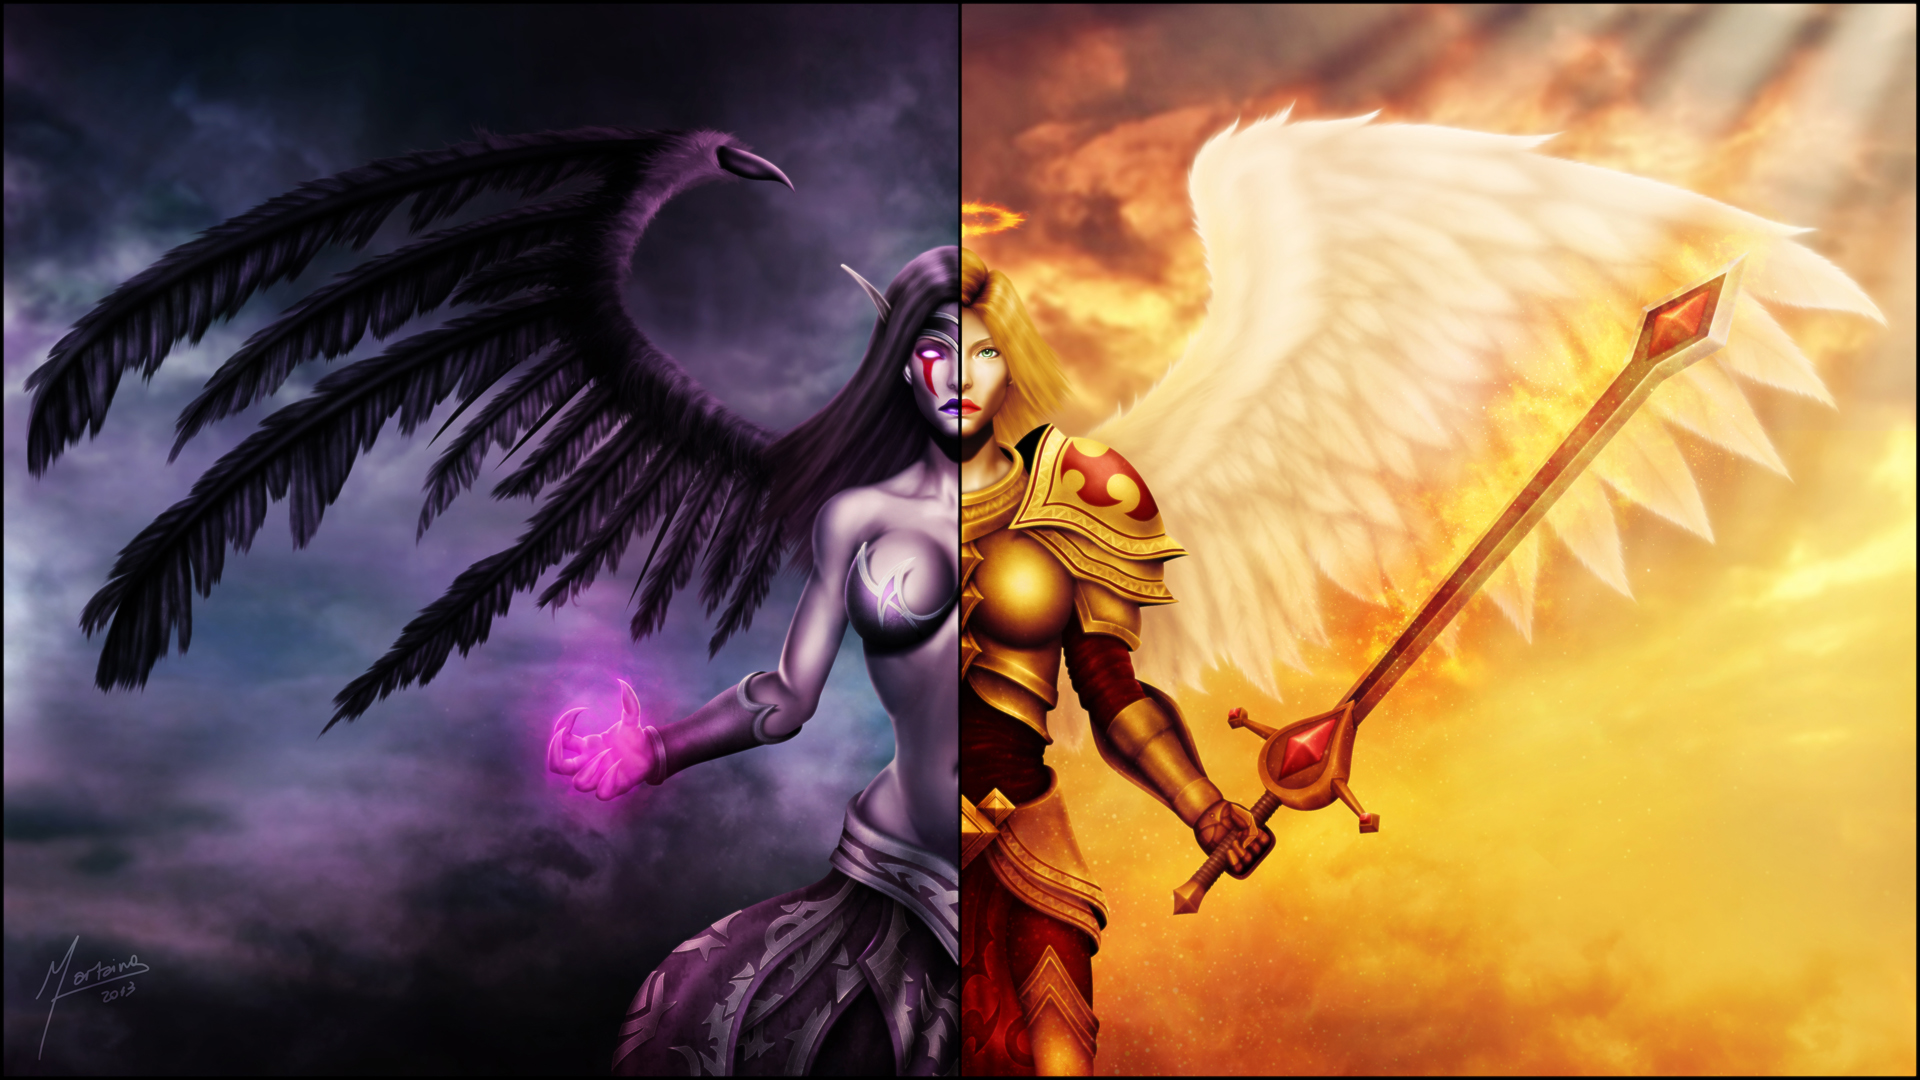 video game, league of legends, kayle (league of legends), morgana (league of legends)